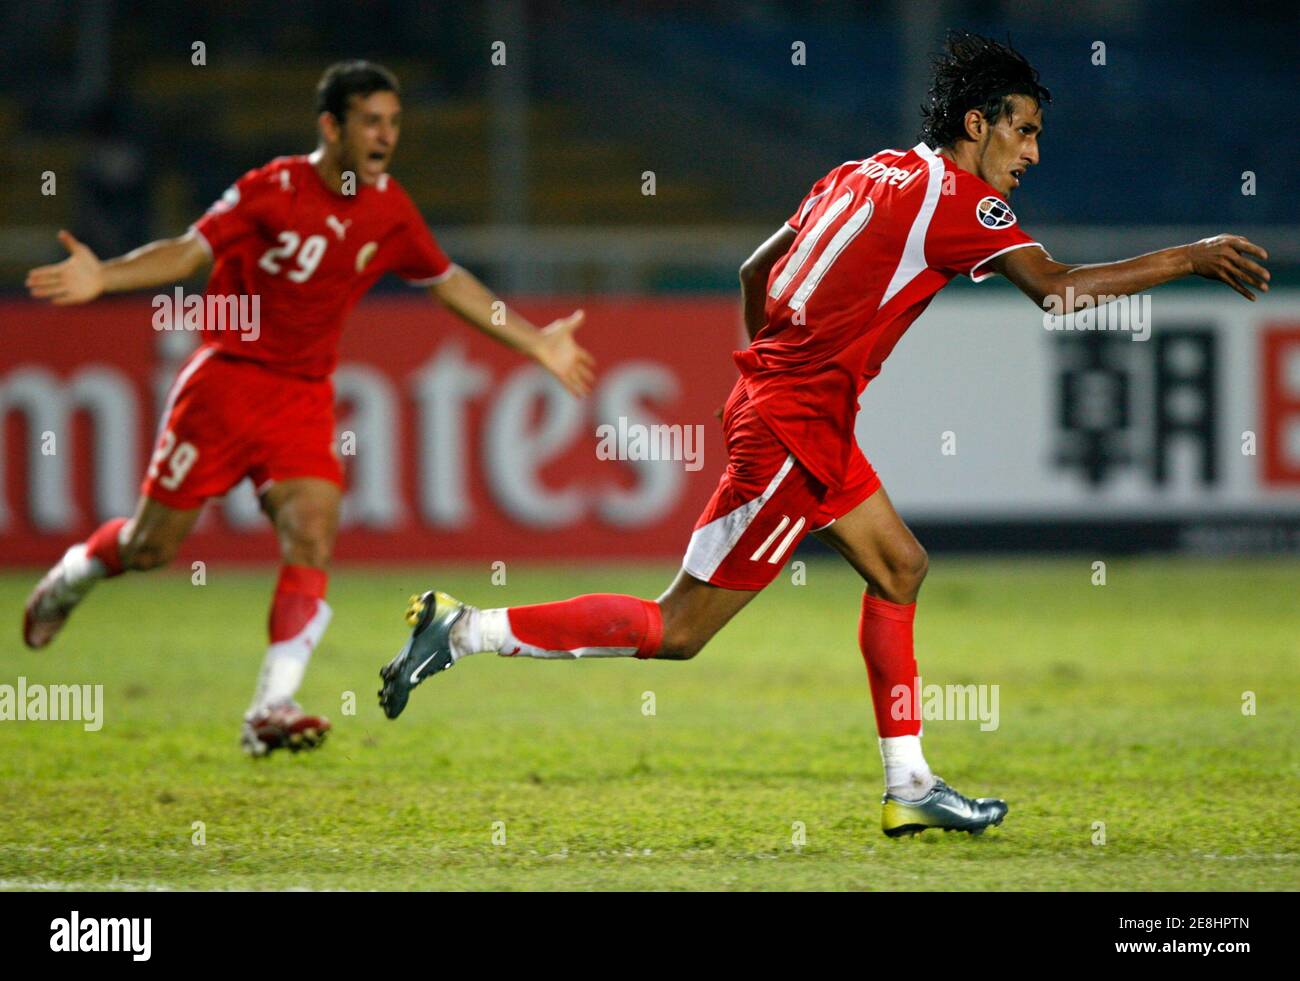 Bahrain's Ismaeel Abdullatif (R) and Abbas Ahmed react after a second goal during their 2007 AFC Asian Cup Group D soccer match against South Korea in Jakarta July 15, 2007. REUTERS/Beawiharta (INDONESIA) Stock Photo